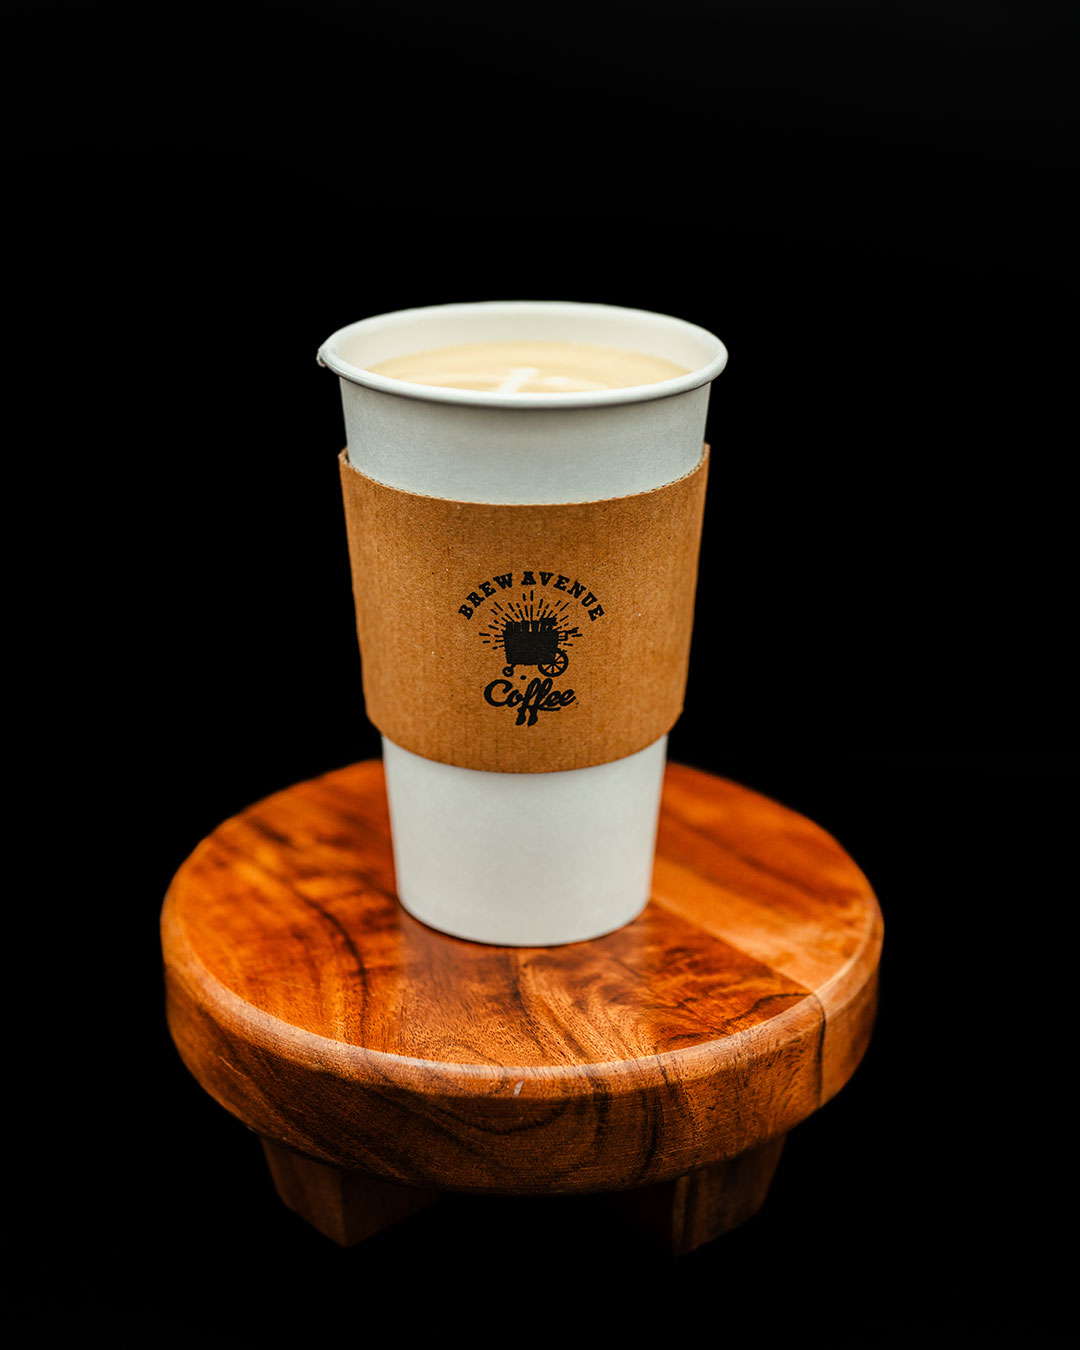 Latte in a white cup with the Brew Avenue Coffee logo on a wooden stool.